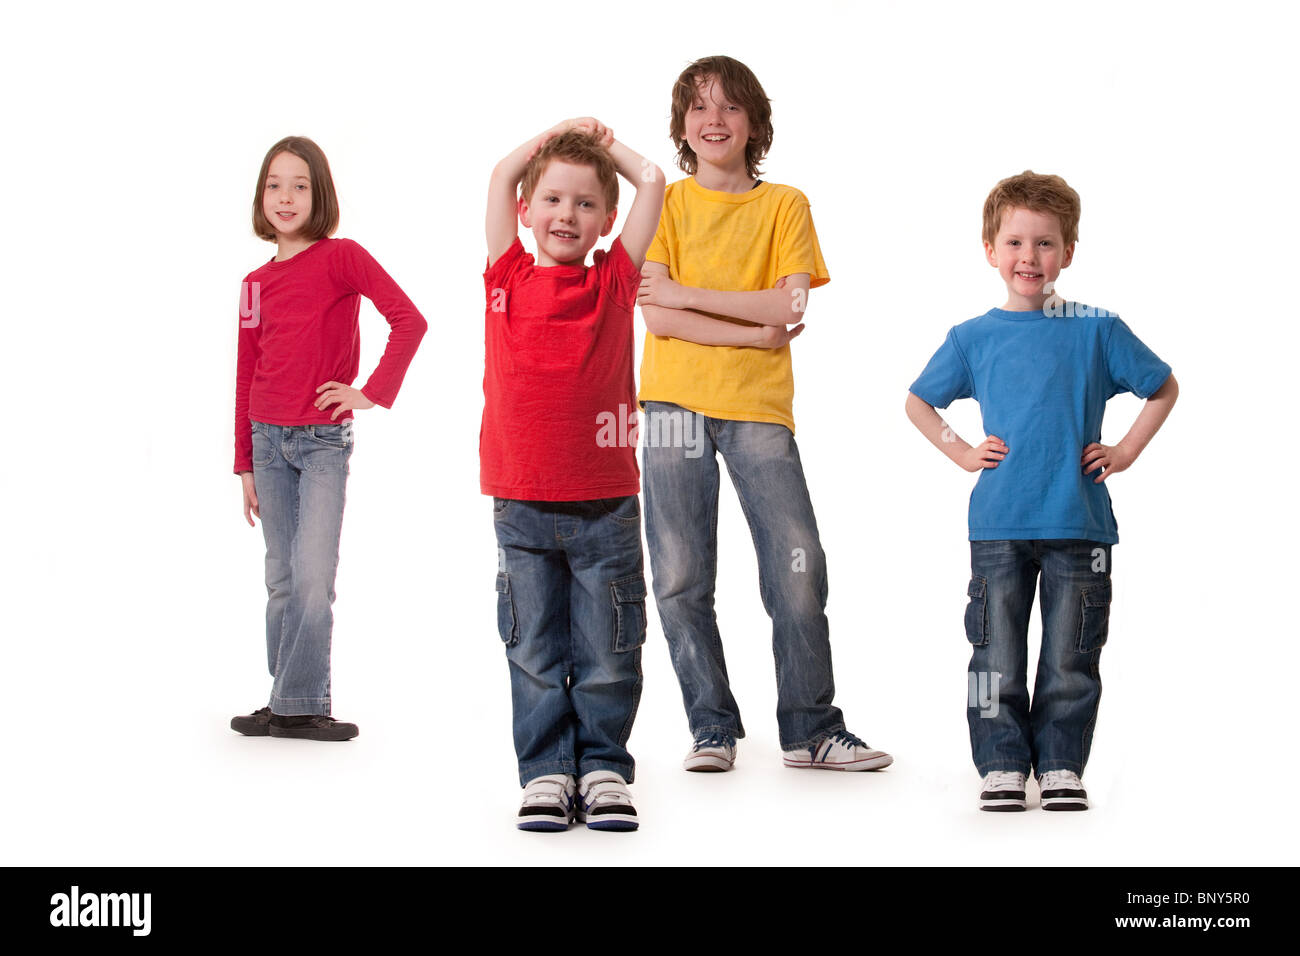 Young children isolated on a white background Stock Photo